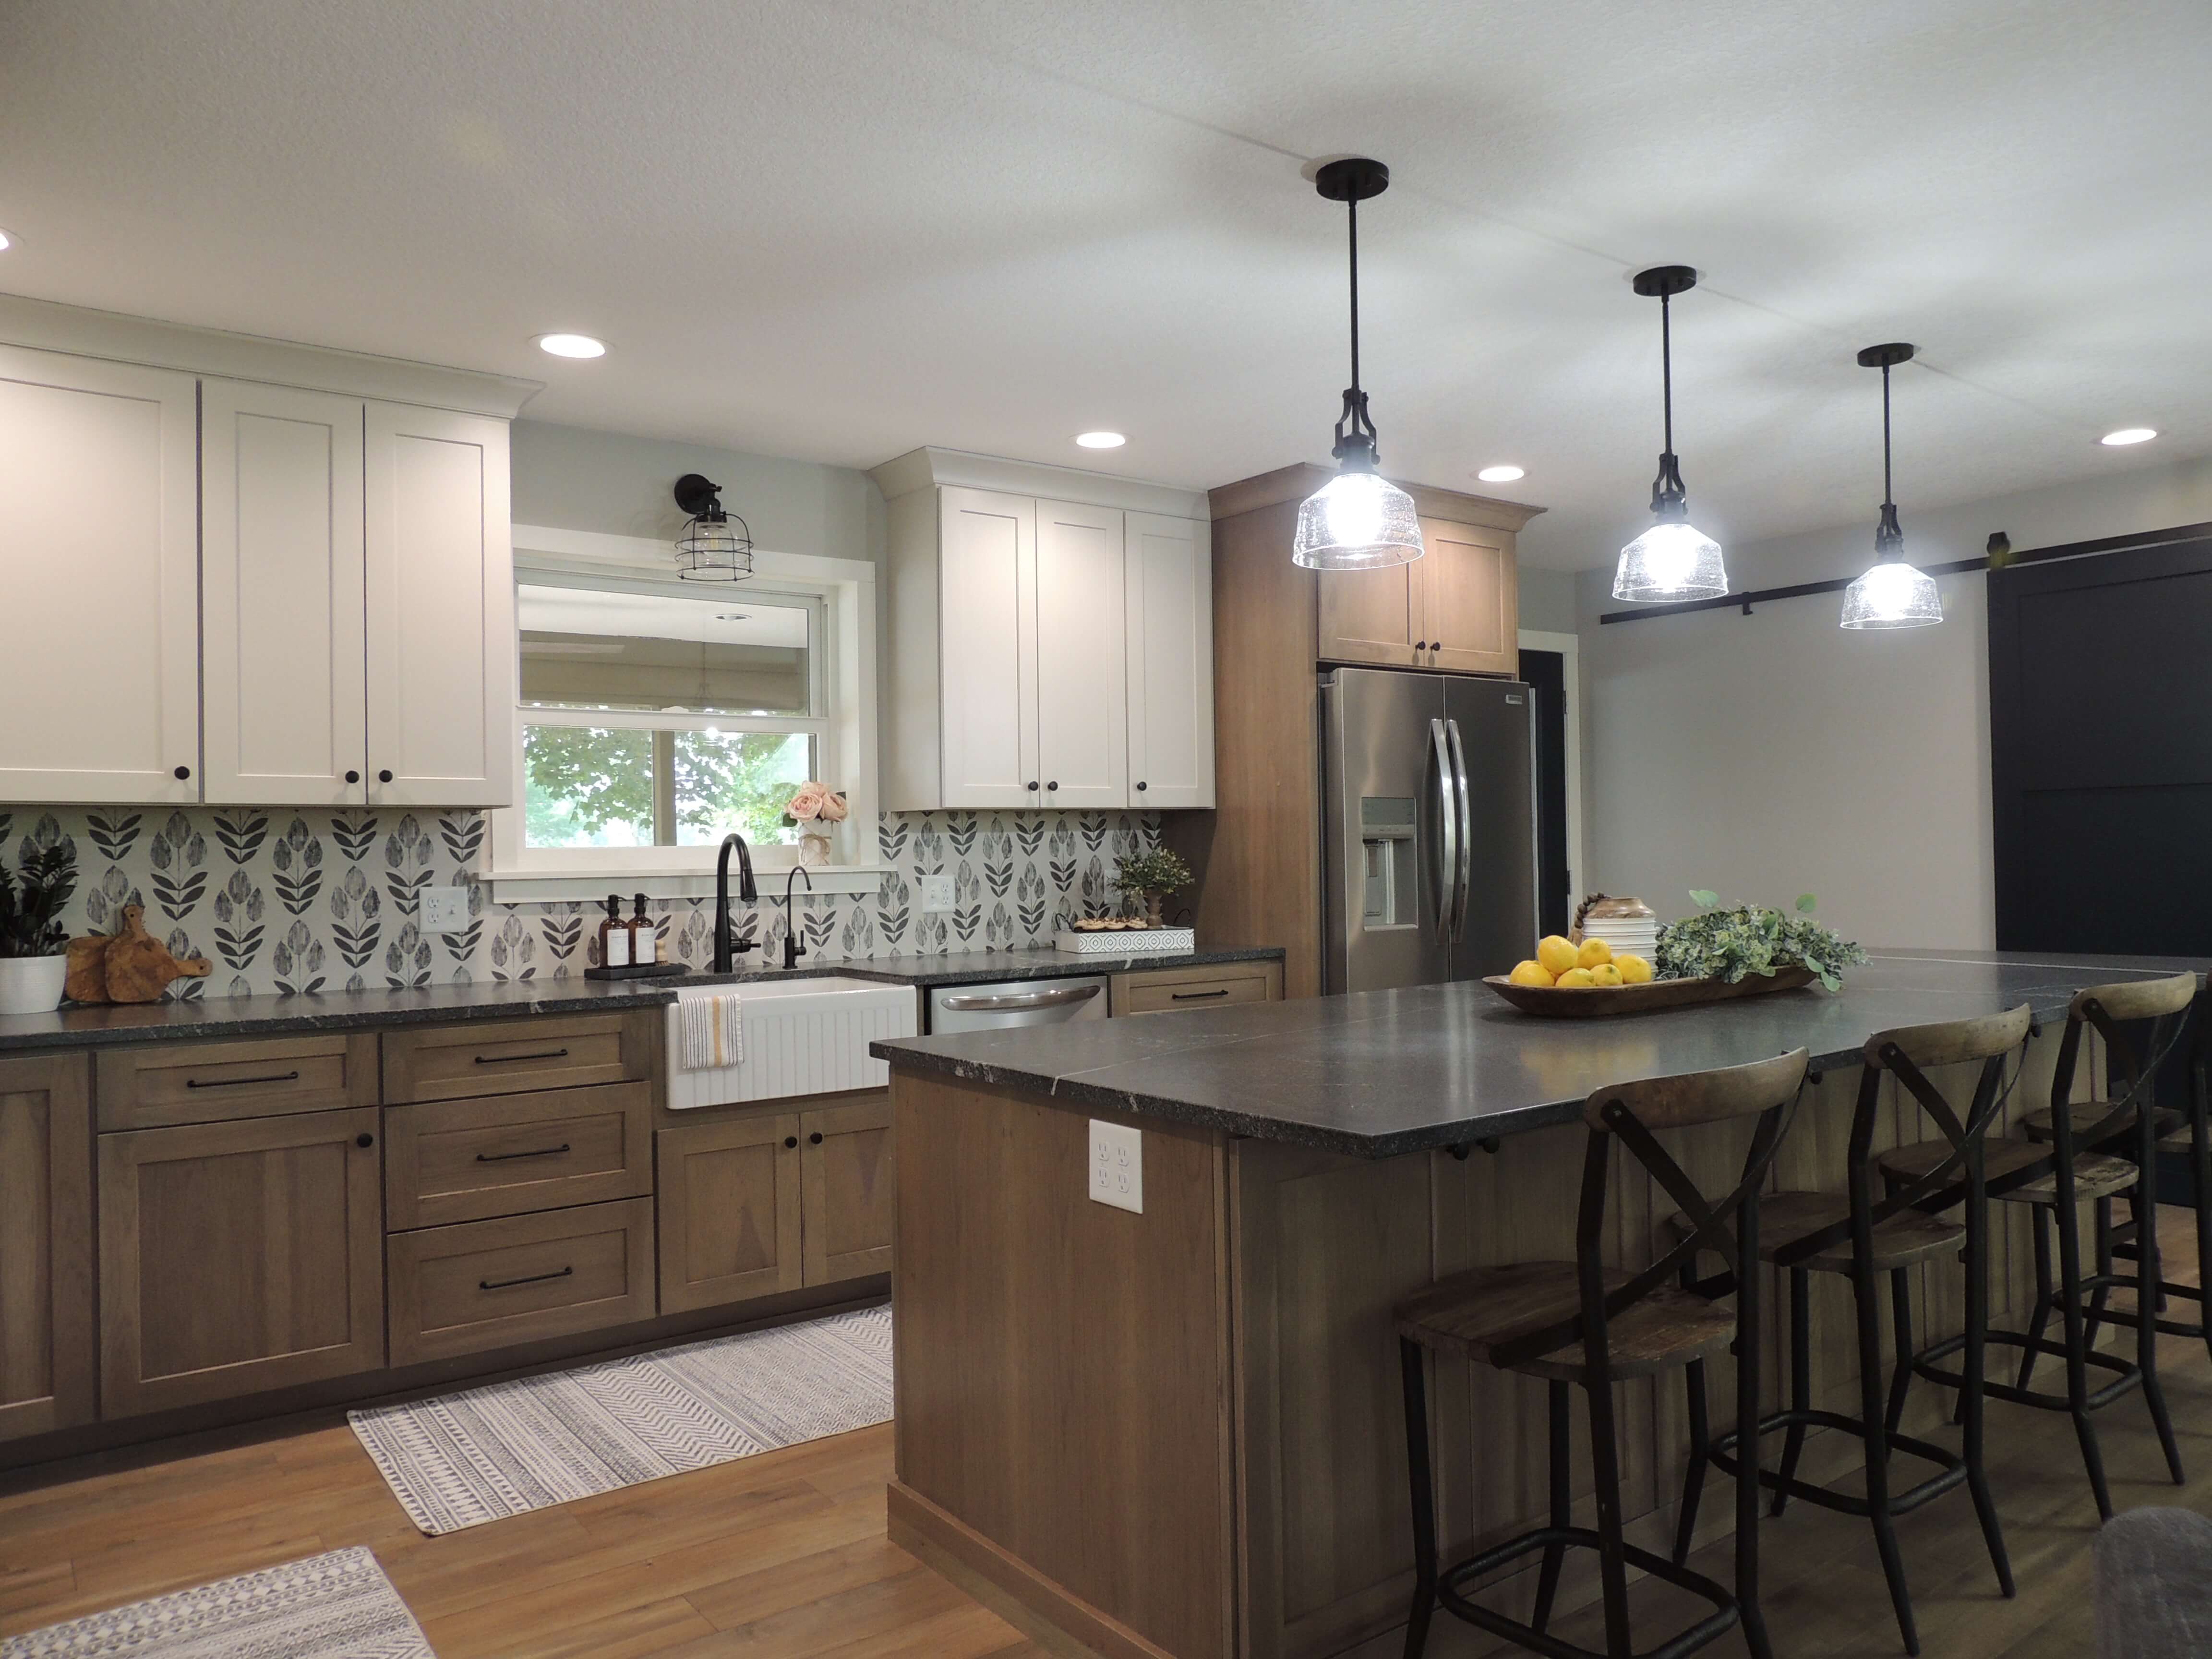 A pretty kitchen remodel with two colors of kitchen cabinets mixing stained wood and soft painted finishes.